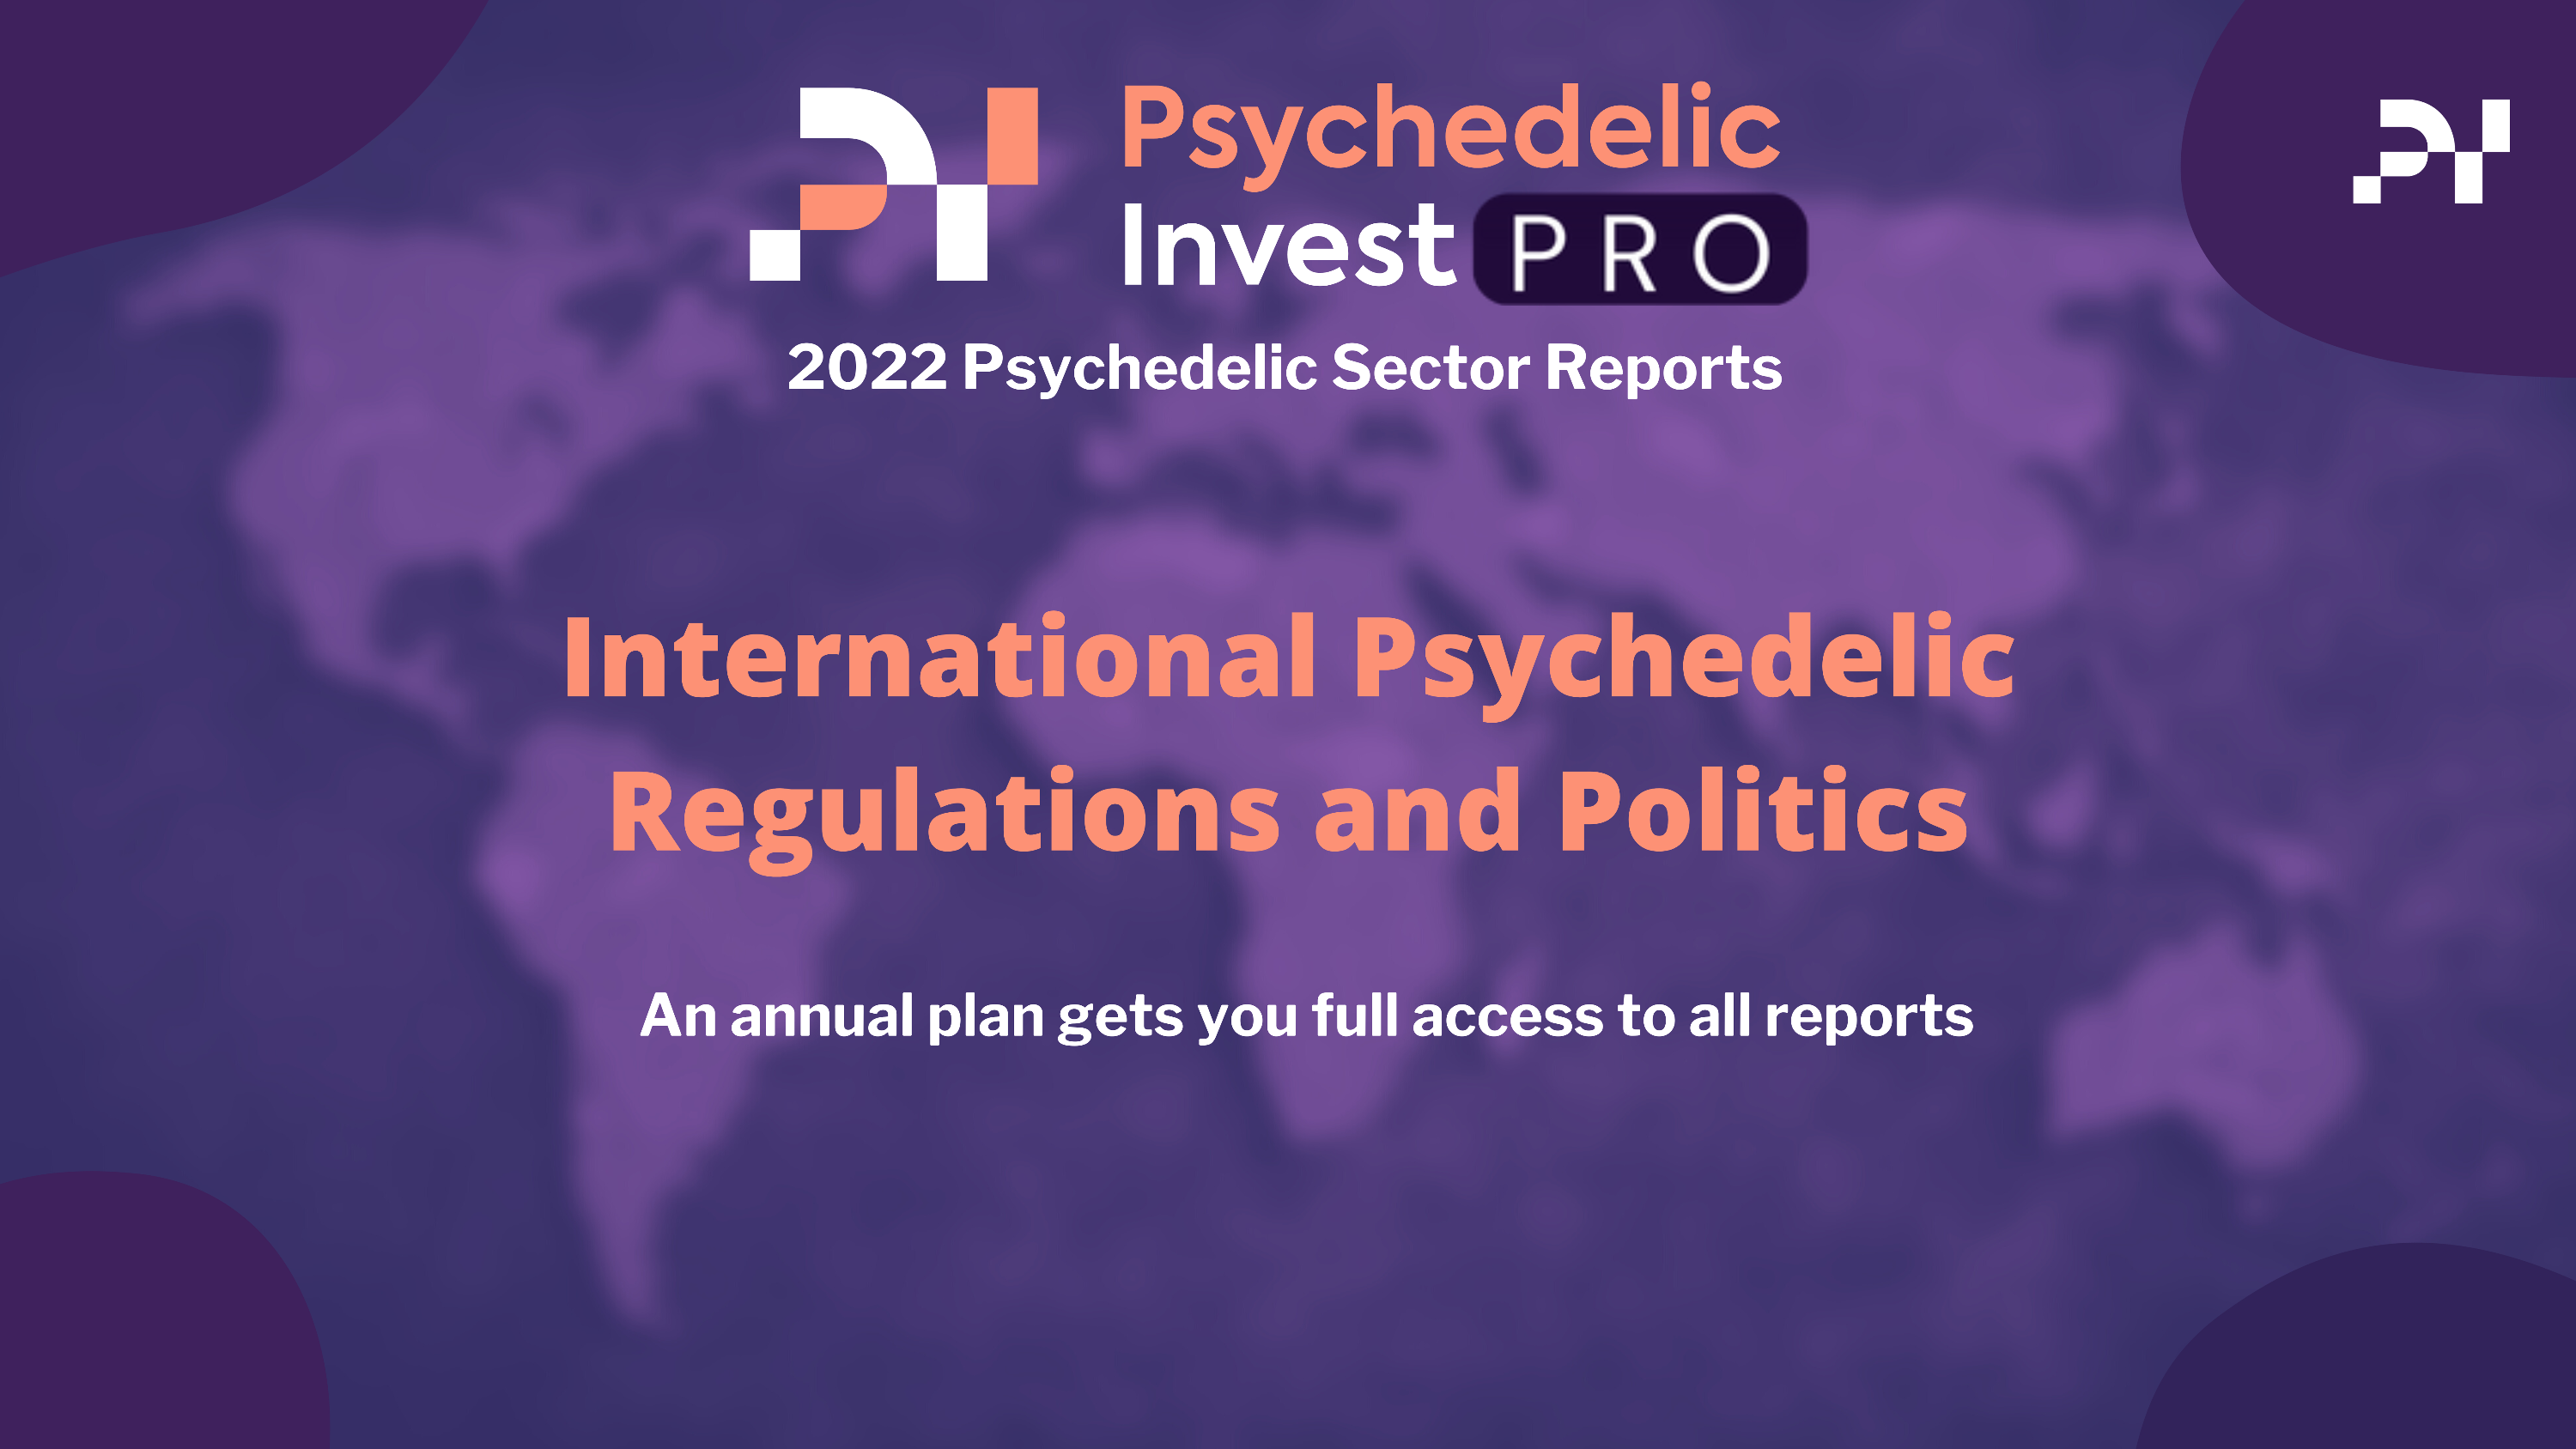 International Psychedelic Regulations and Politics